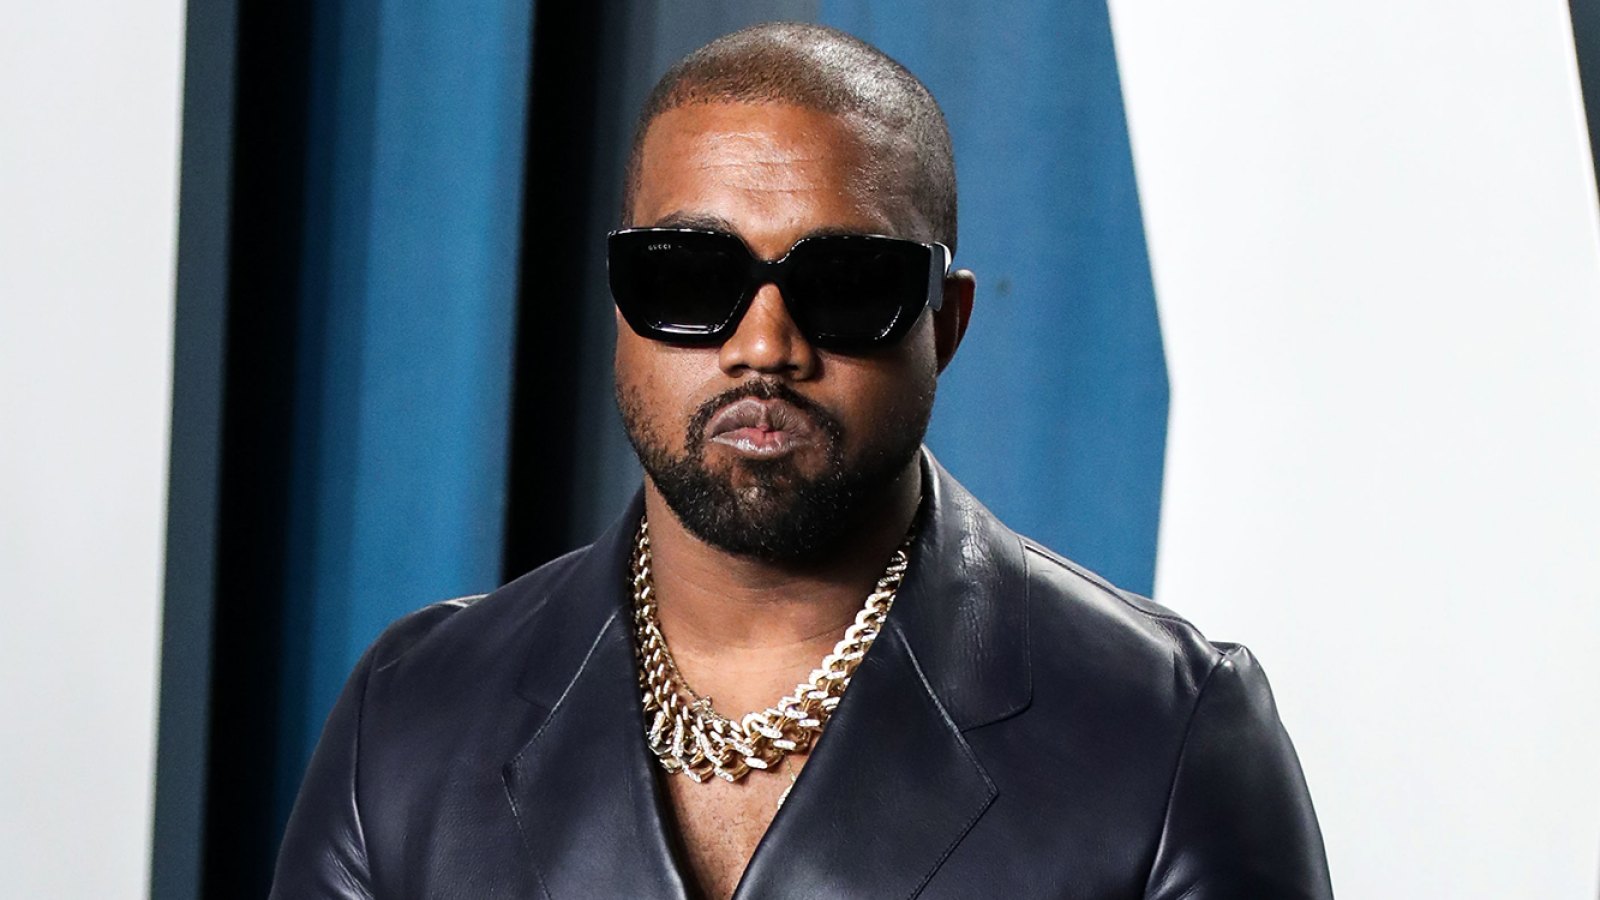 Kanye West’s Half-Shaved Haircut Was Inspired by Britney Spears’ 2007 Breakdown